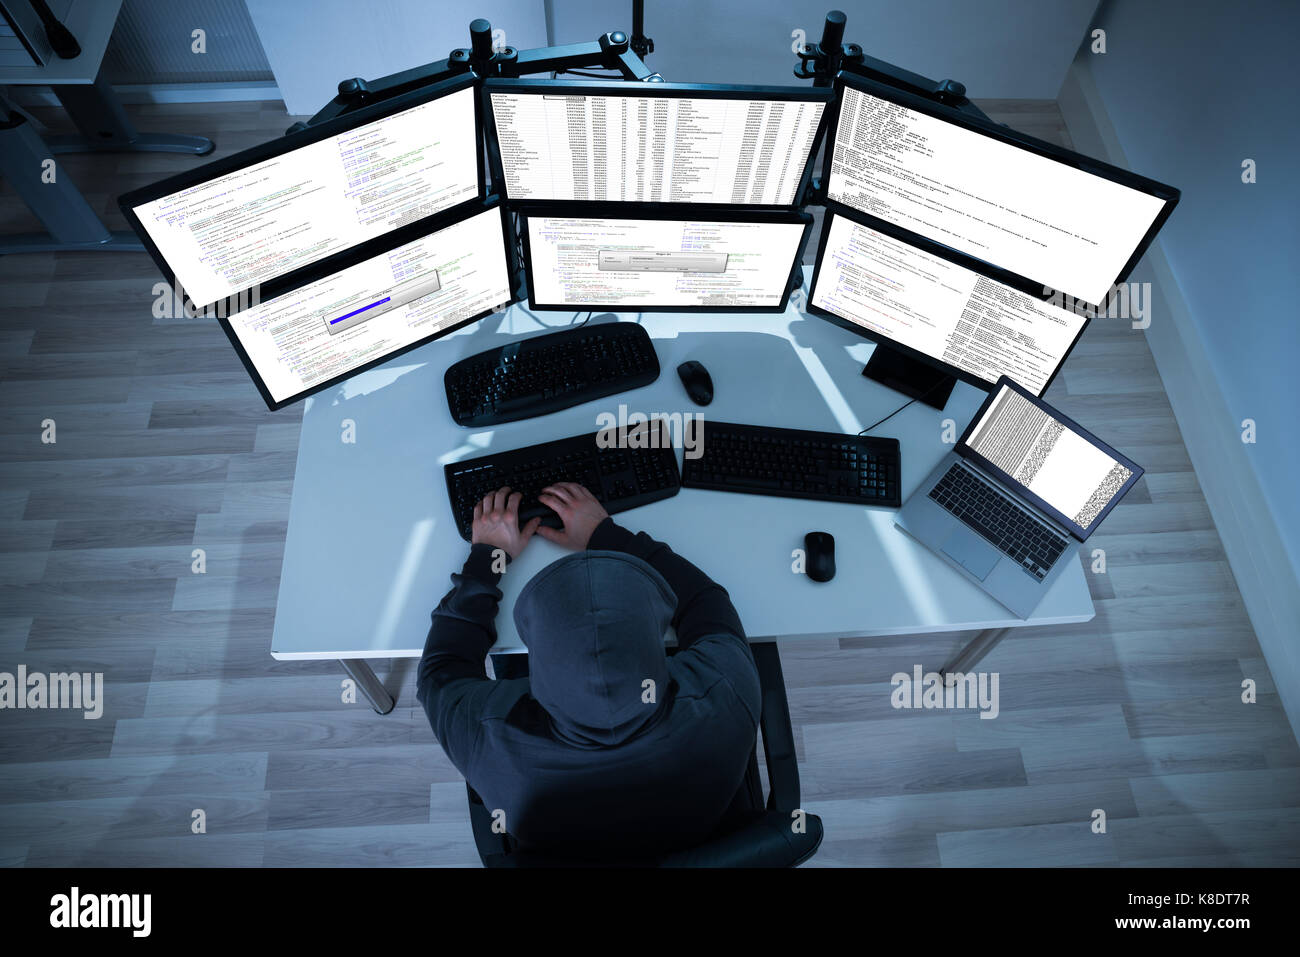 High angle view of hacker using computers to steal data Stock Photo